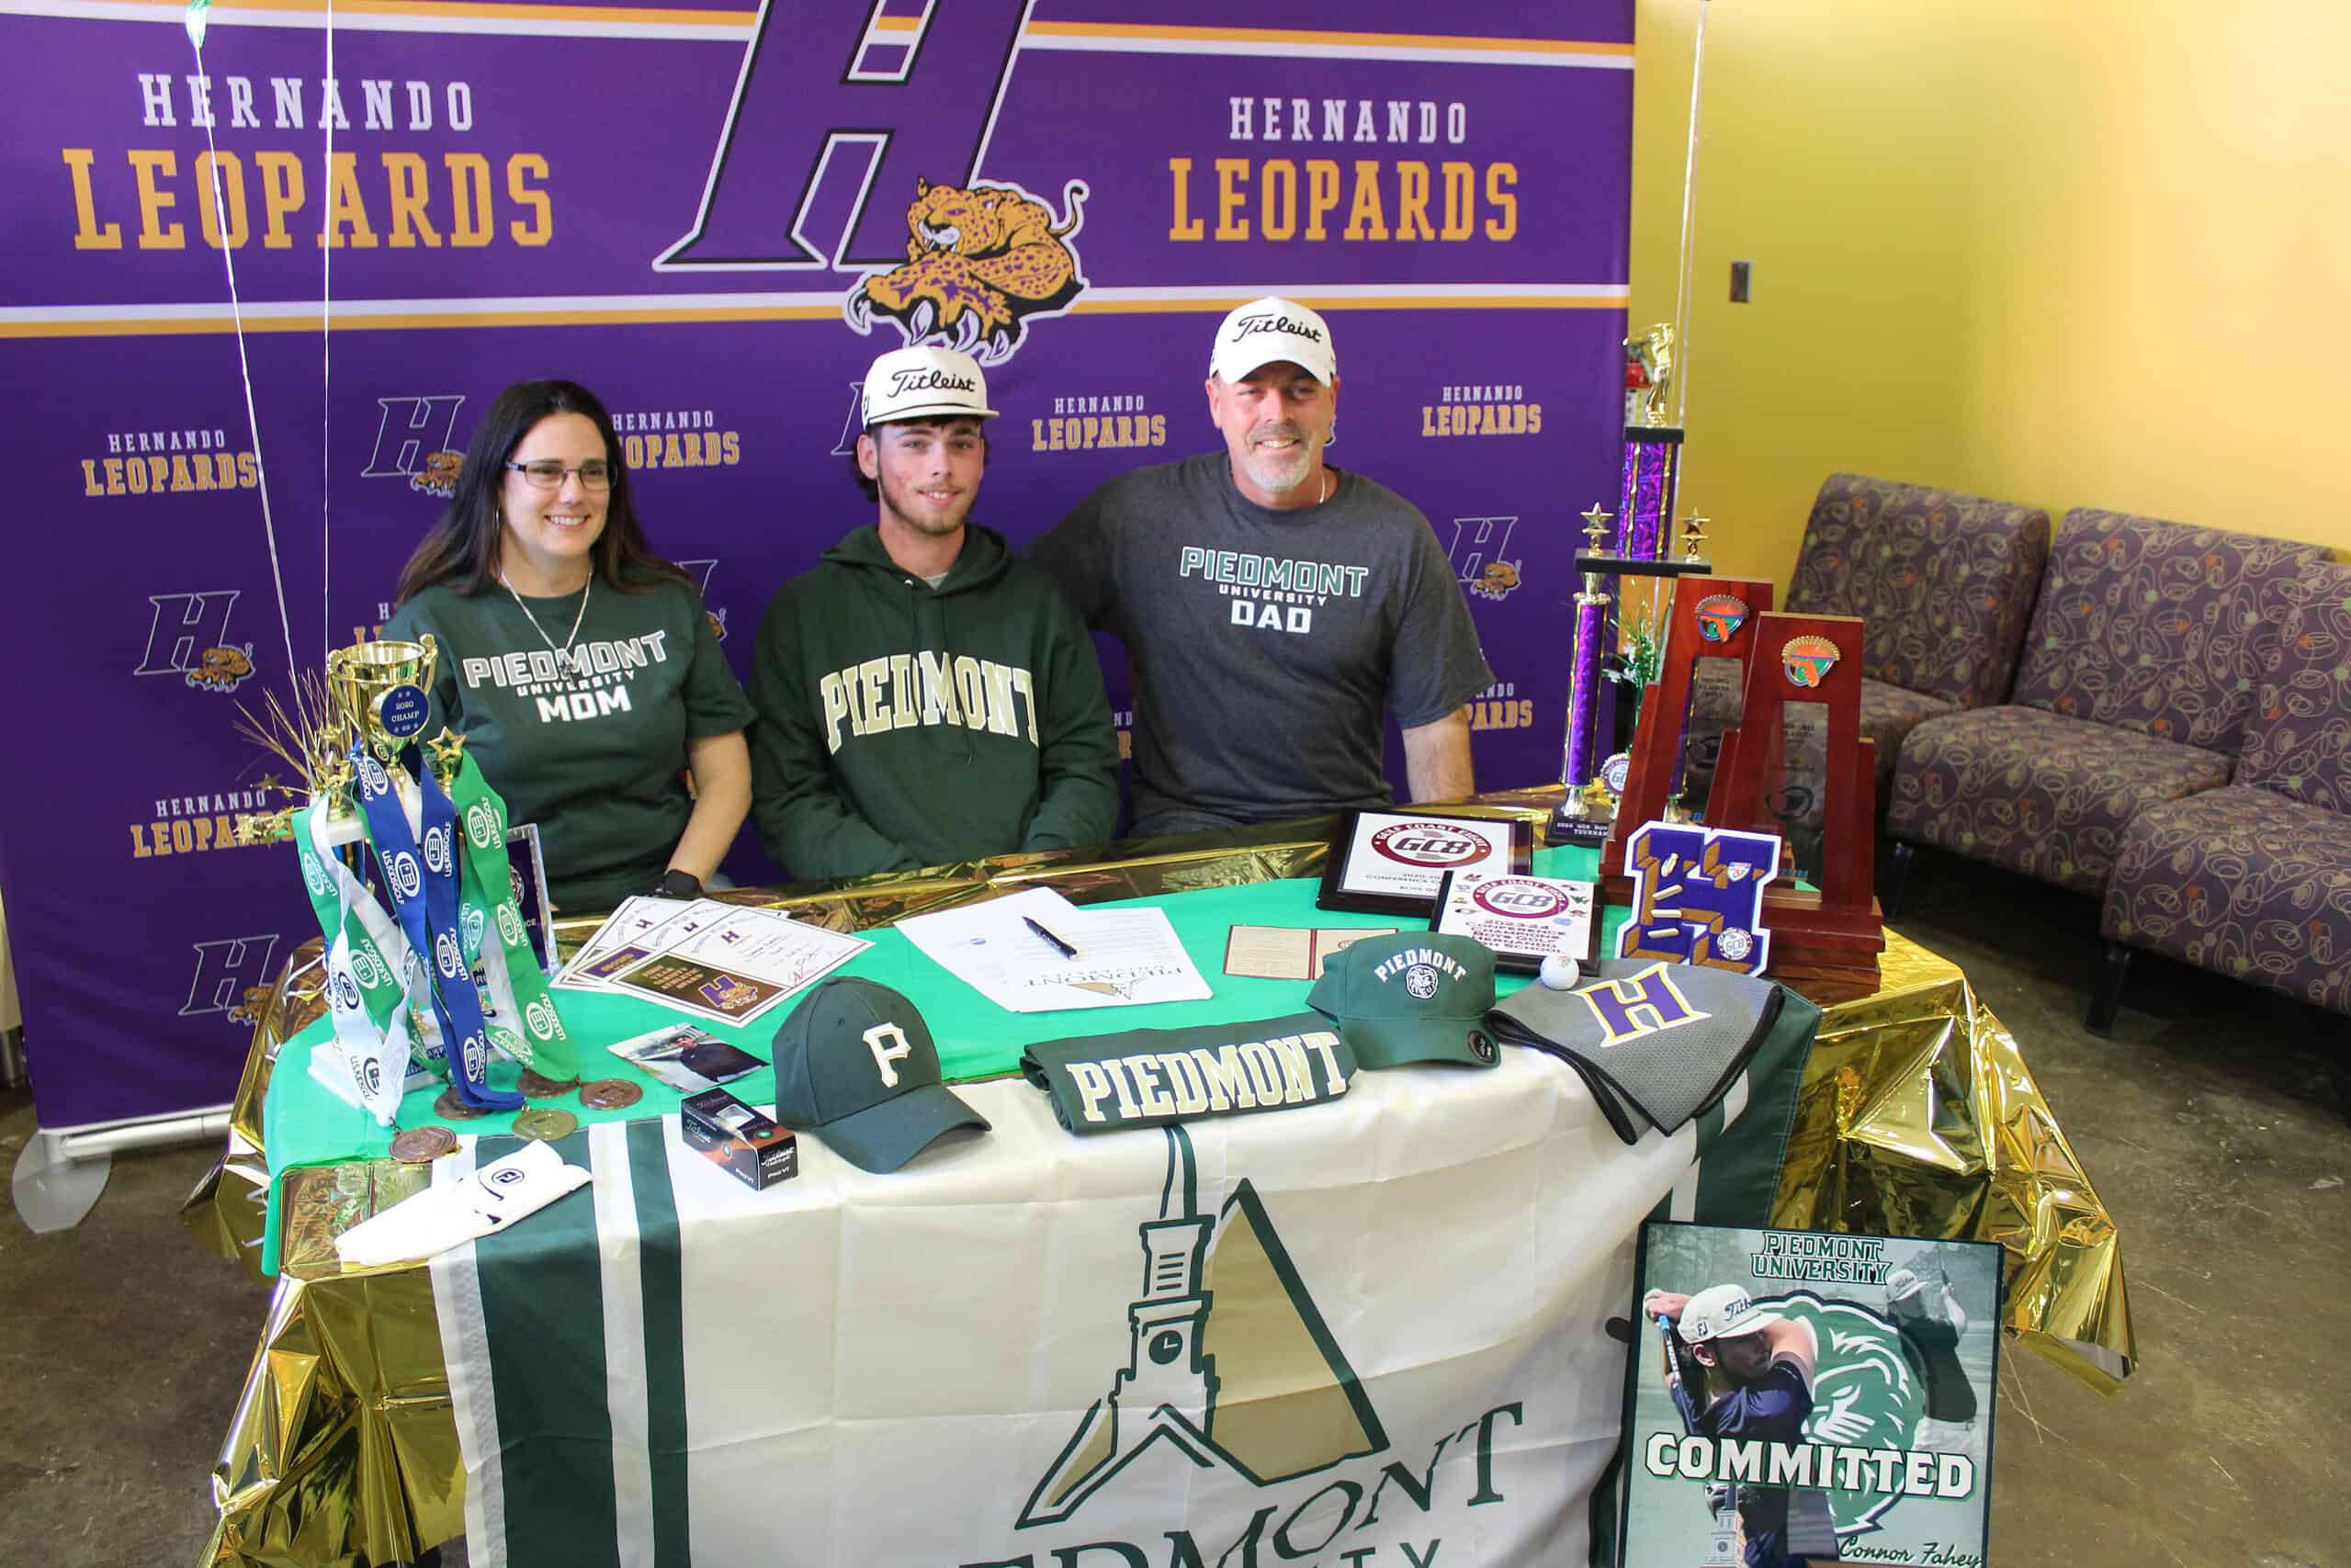 Connor Fahey (middle) poses for a photo with his father, Dennis (right), and mother, Jennifer (left), during Tuesday’s signing ceremony. [Credit: A. Szempruch]